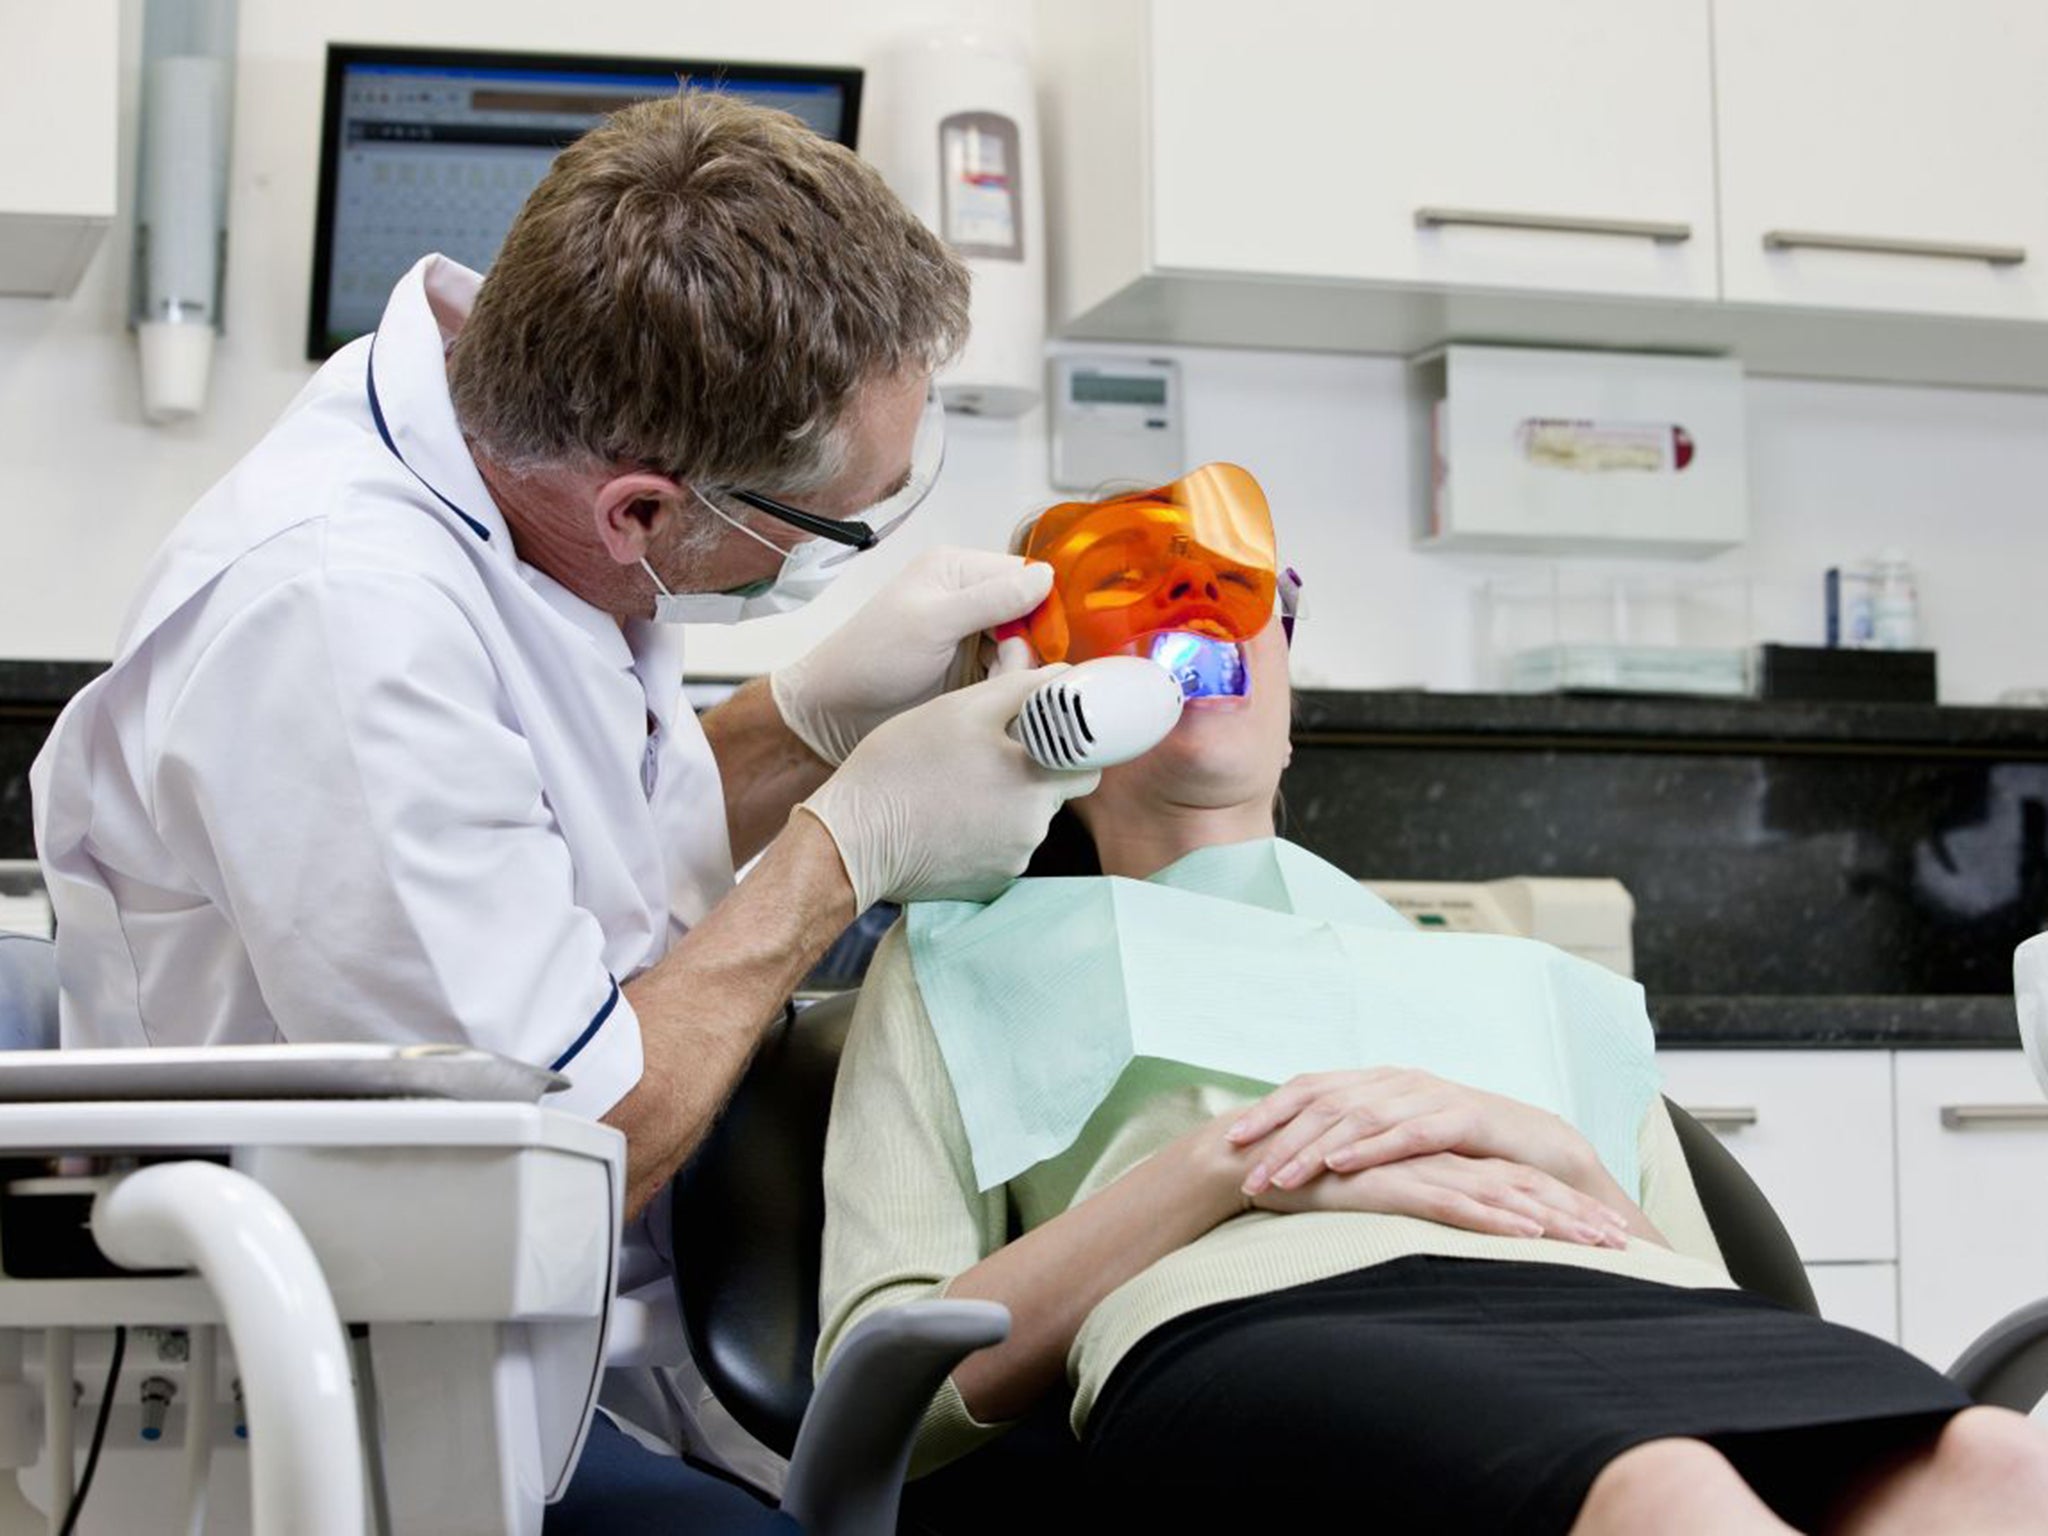 The General Dental Council raises annual fees to cope with troubles ahead